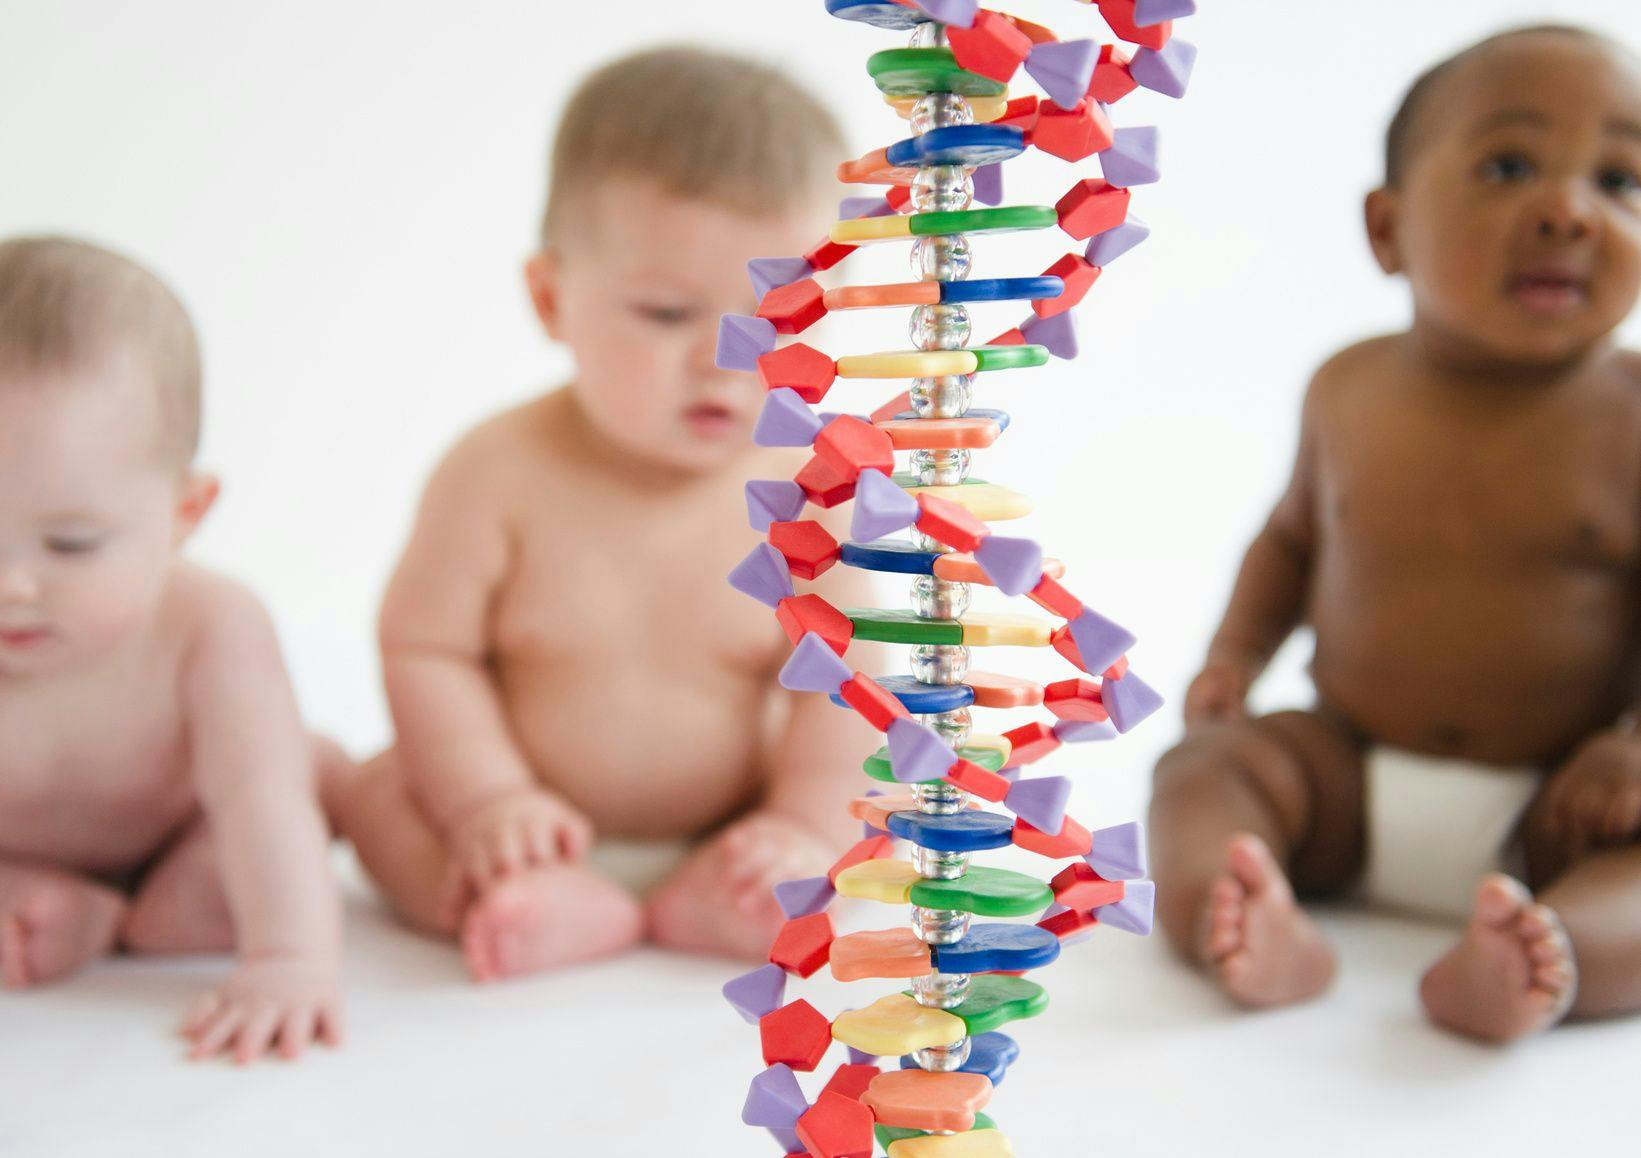 WGS can identify variants in all 20,000 genes in the human body, and NewbornDx or targeted gene sequencing can find variants in 1,722 genes known to be linked to genetic disorders in newborns and infants. © JGI/Jamie Grill/Blend Images - stock.adobe.com

